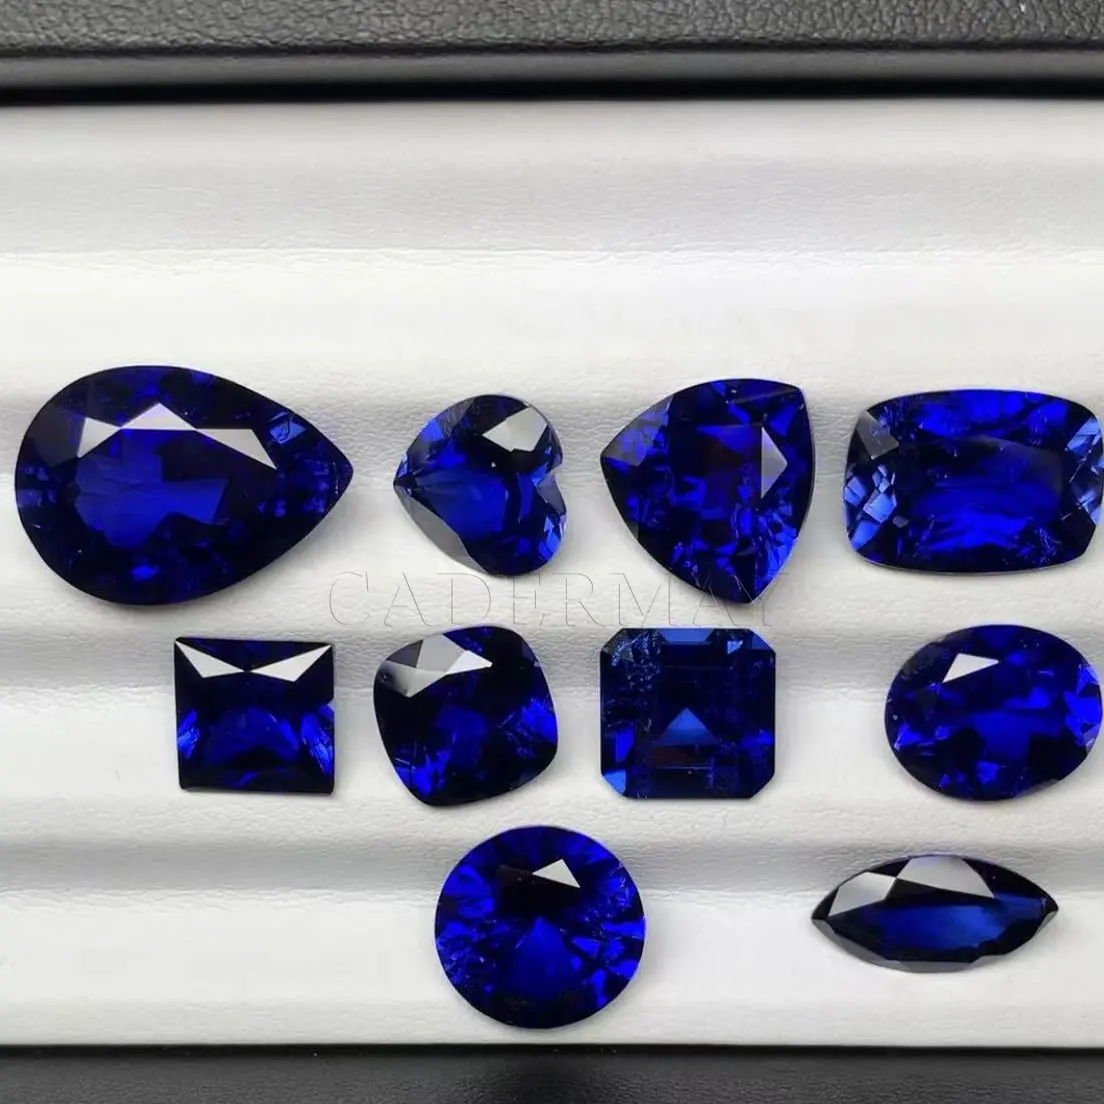 Cadermay 11 Shapes Lab Grown Sapphire Loose Synthetic Gemstone with Minor and Inclusions for Jewelry Making